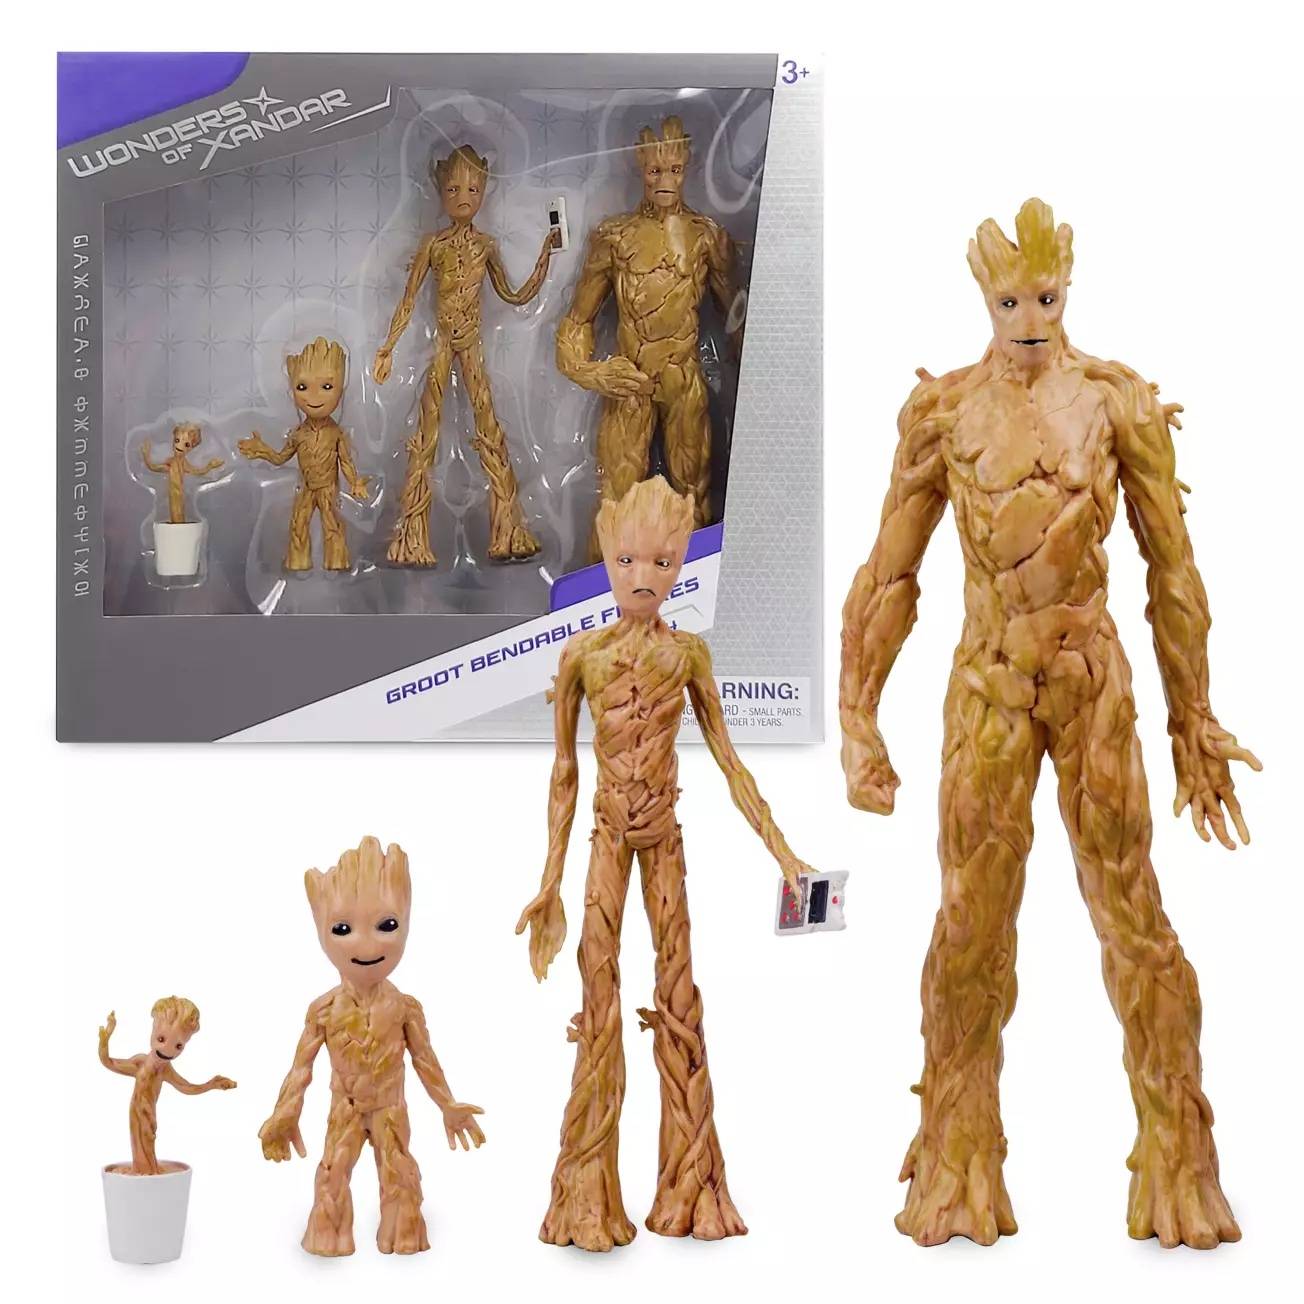 First look at Guardians of the Galaxy Cosmic Rewind merchandise